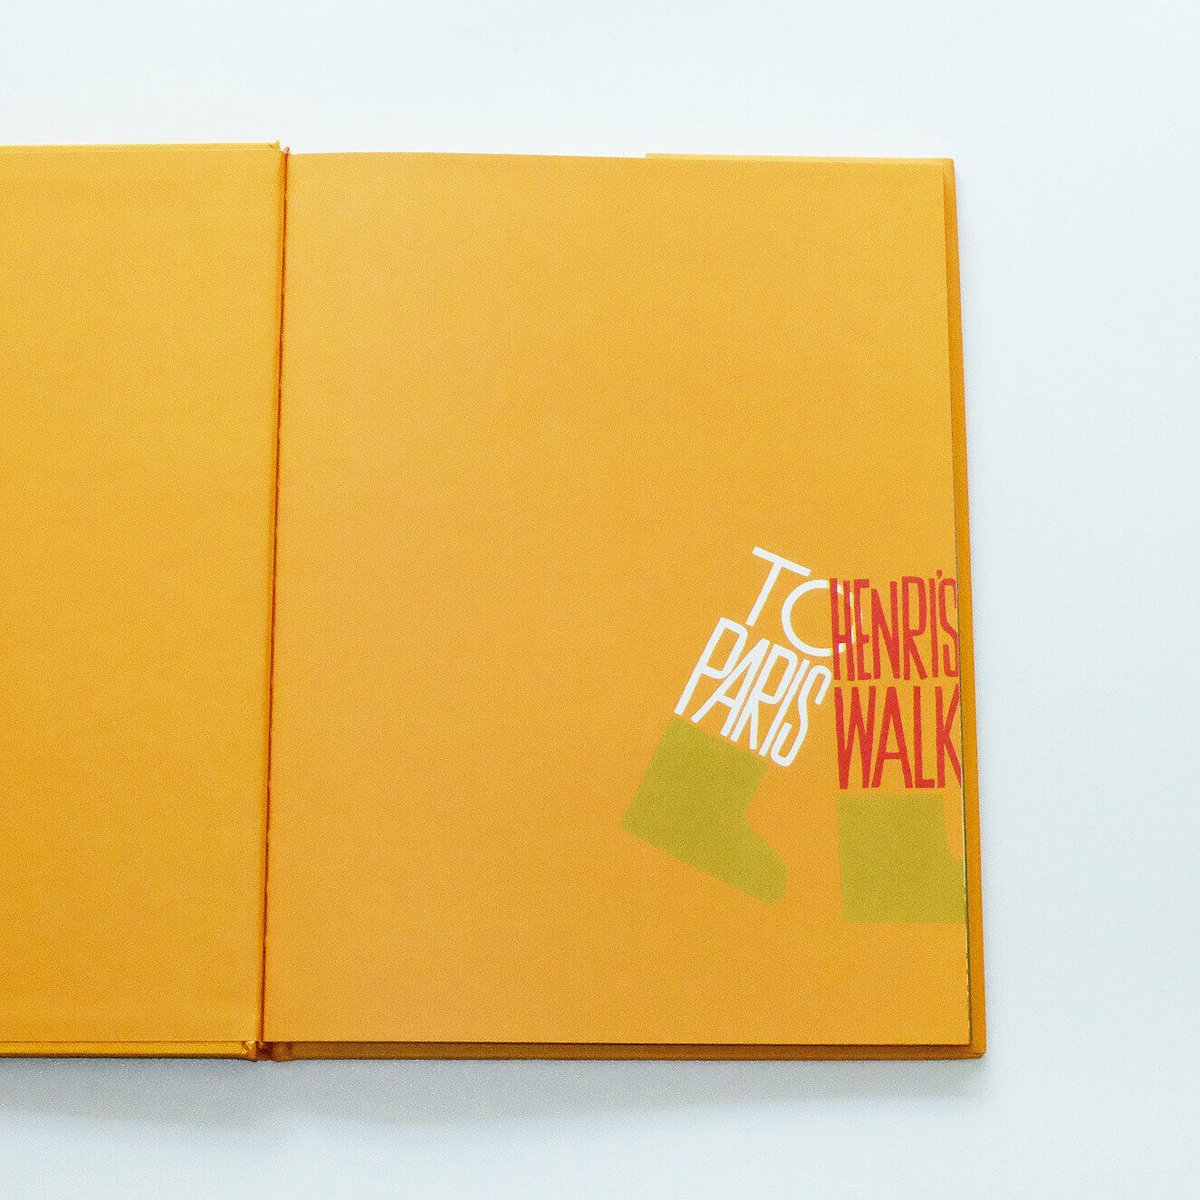 Henri′s walk to Paris: Illustrated by Saul Bass...